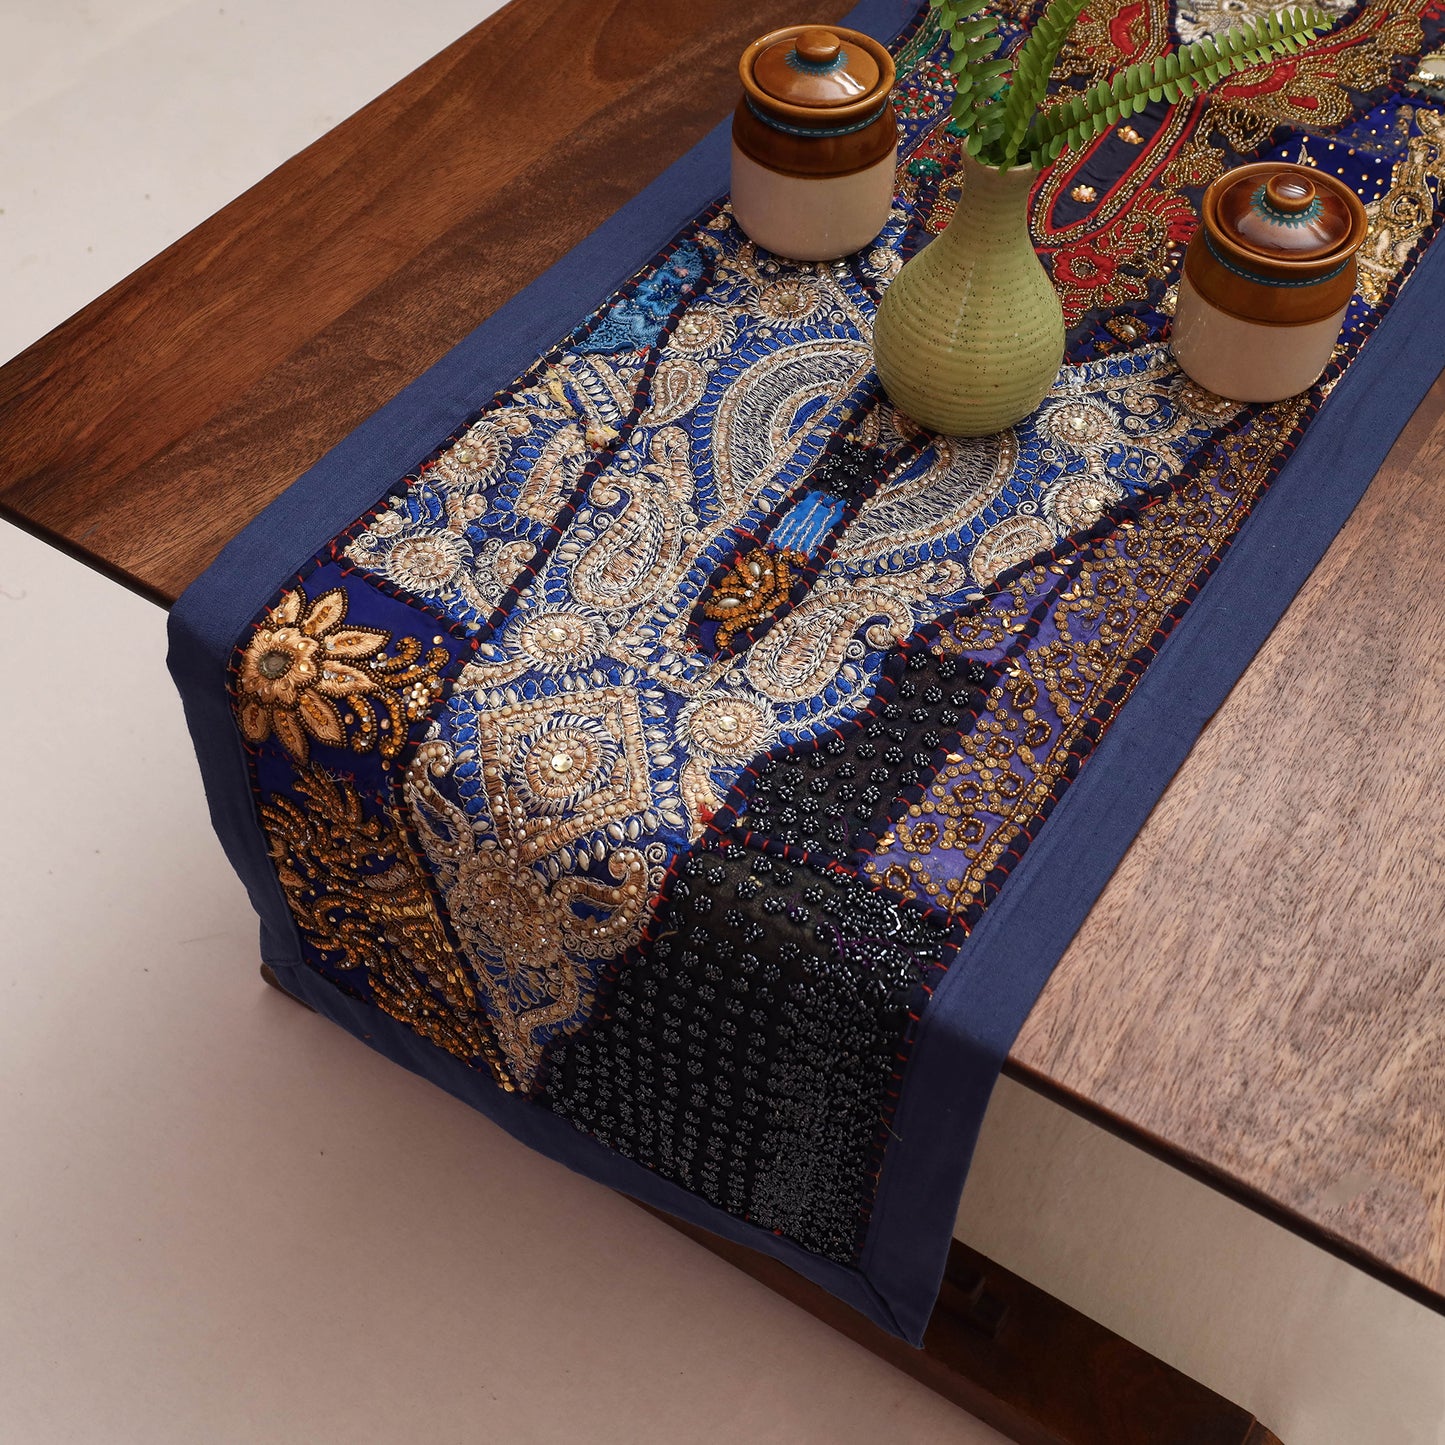 Banjara Vintage Embroidery Table Runner (60 x 14 in)